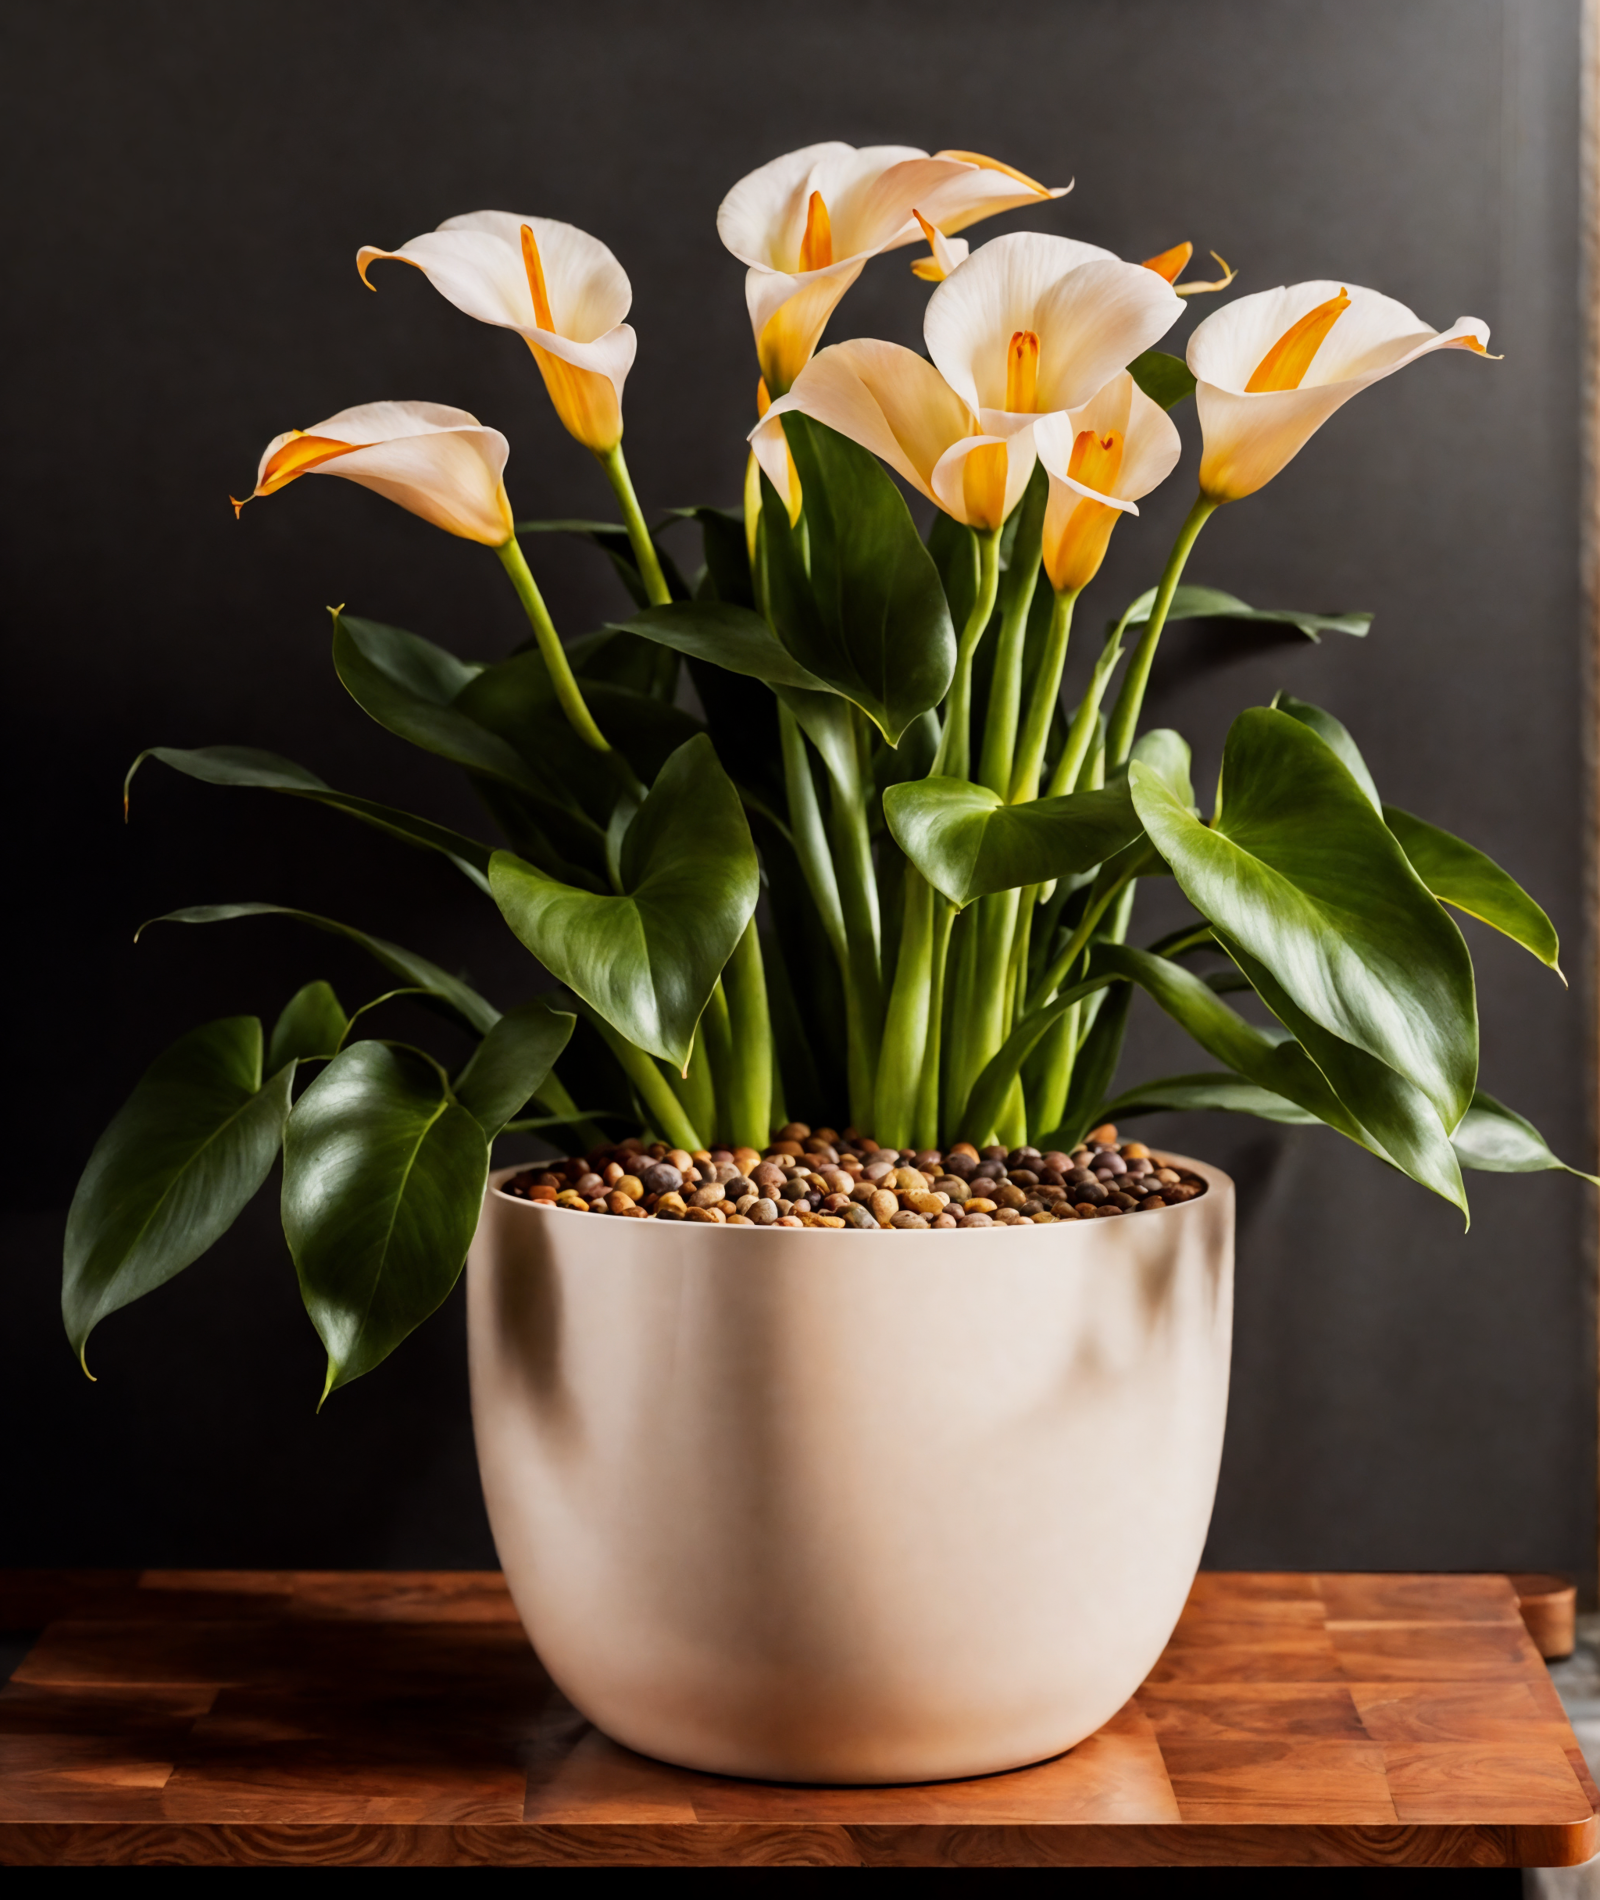 Potted Zantedeschia aethiopica with orange and white blooms on a wooden table, clear indoor lighting.